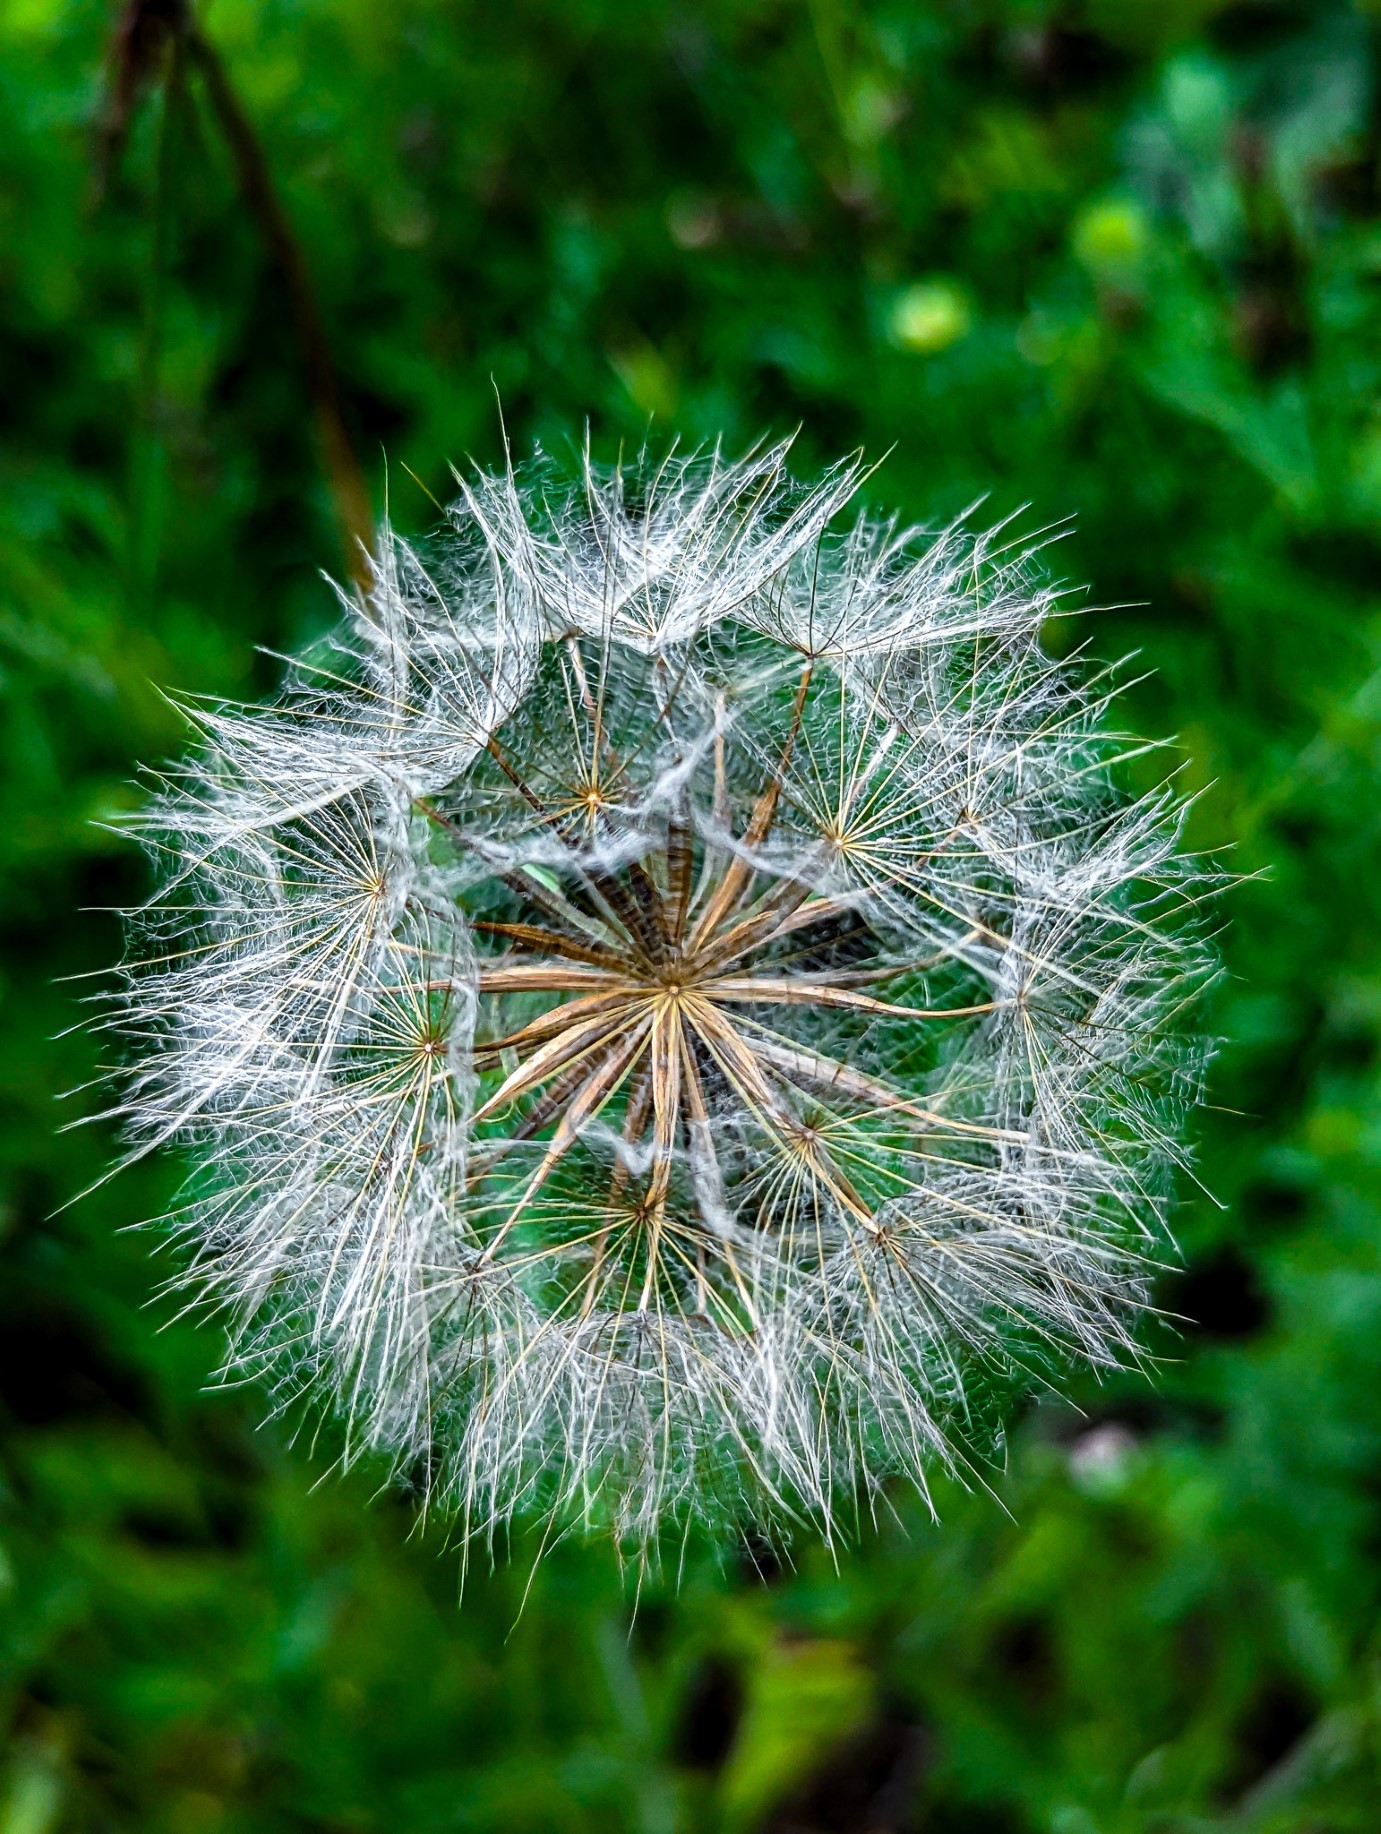 The pappus plays a vital role in the wind-aided dispersal of seed